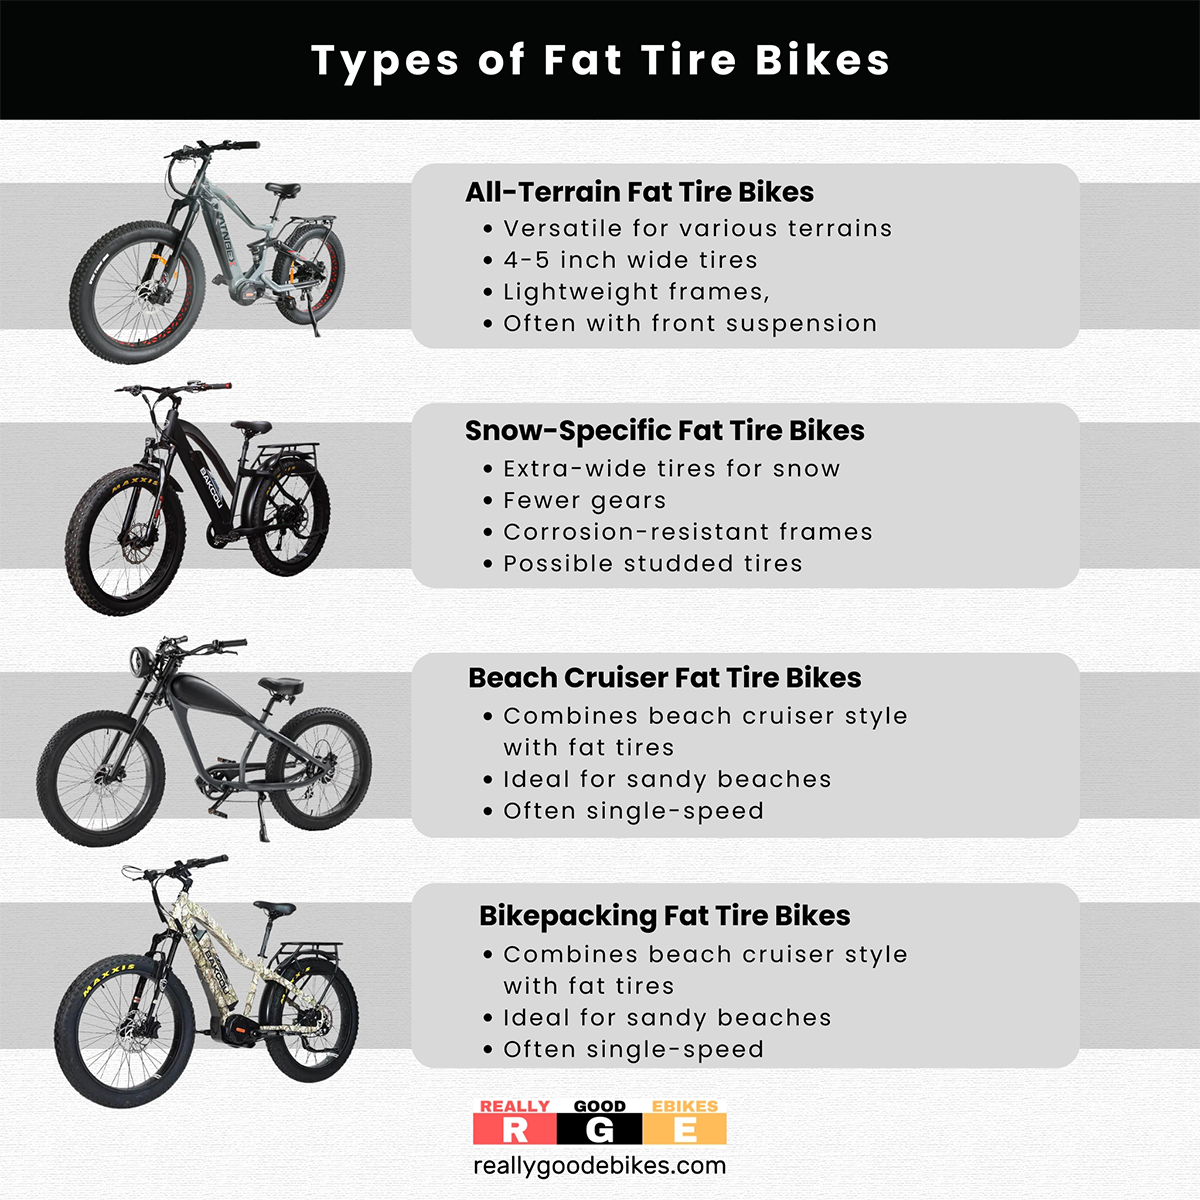 Types of Fat Tire Bikes